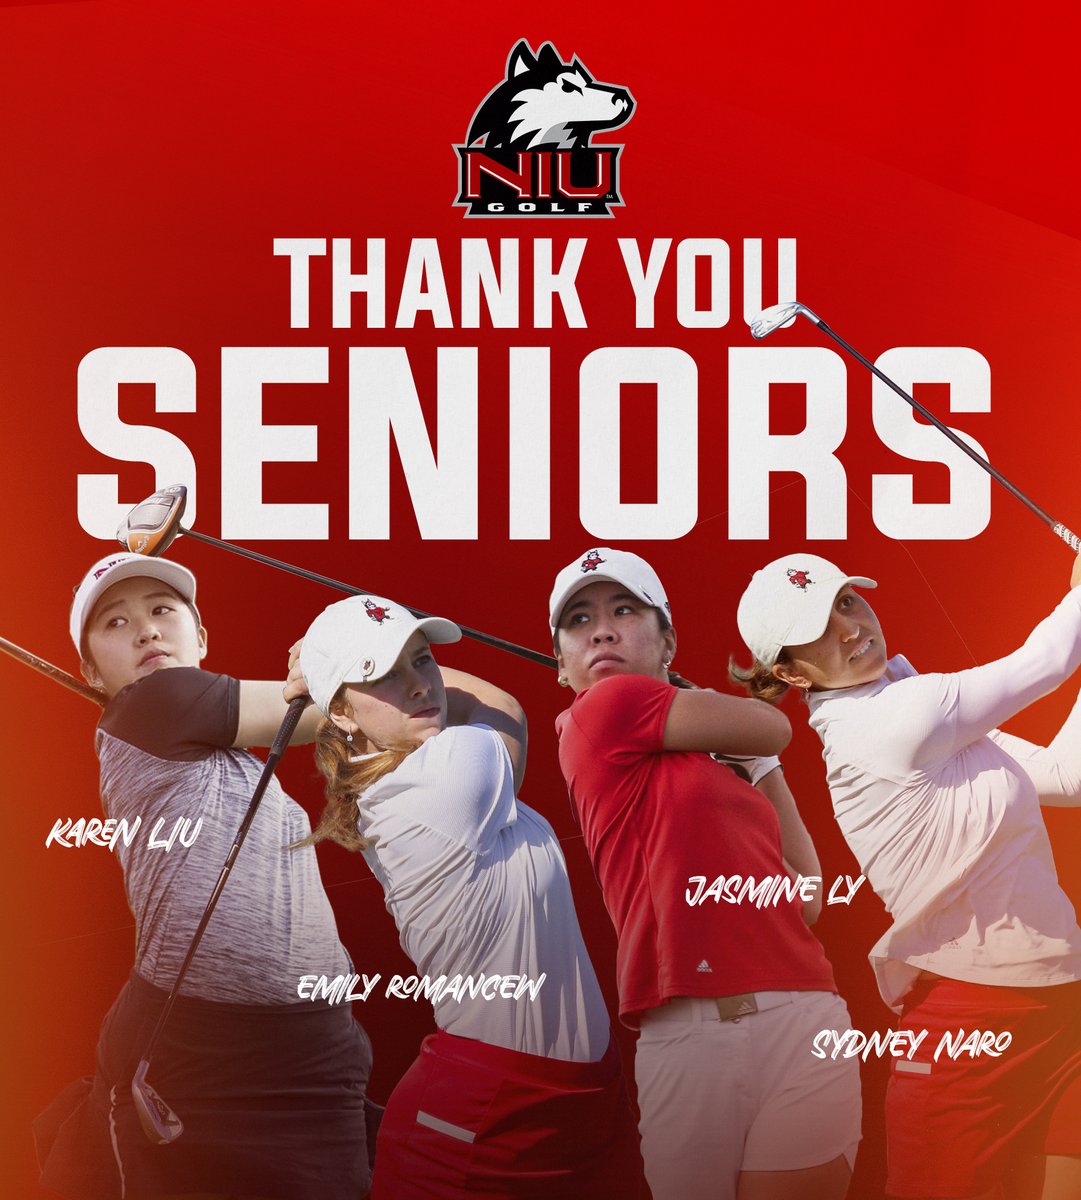 Thank you to Karen, Emily, Jasmine, and Sydney for giving your all to NIU women's golf! 

We will miss you but are so excited to watch the next chapter ⛳️🐾